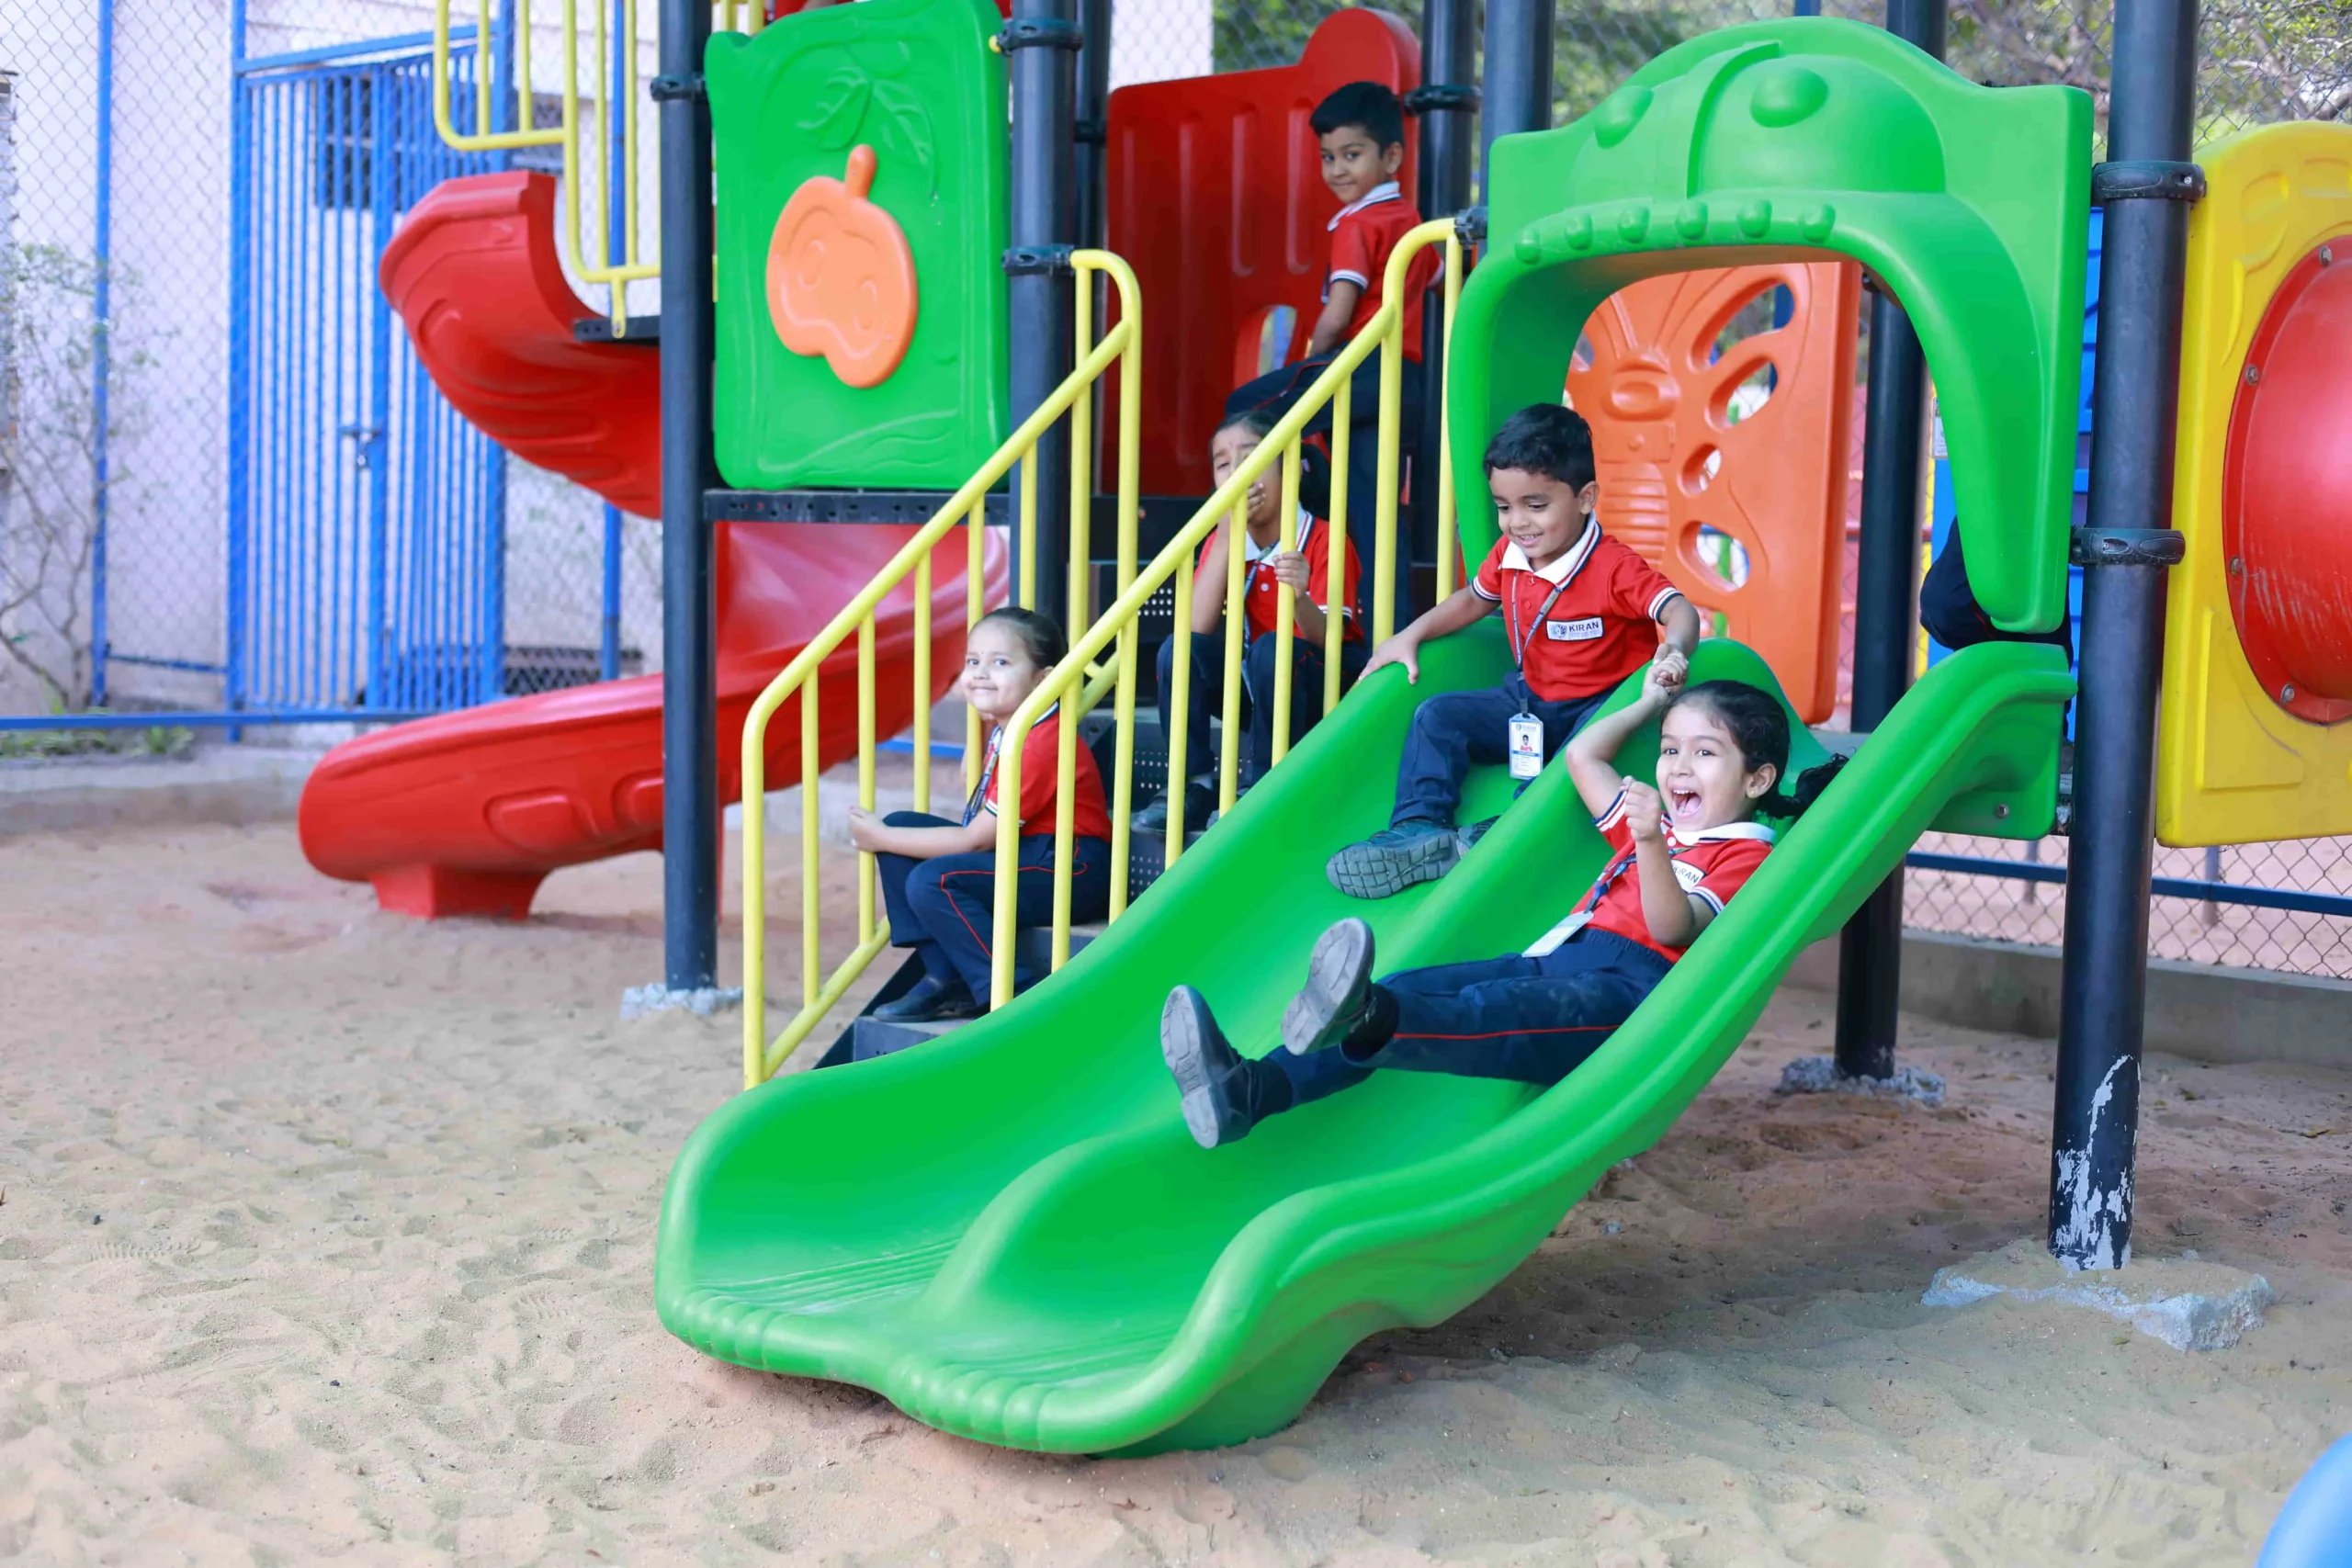 Joyful students actively enjoying a multi-play station set in a sandpit at Kiran International School, experiencing fun and camaraderie through play and exploration.